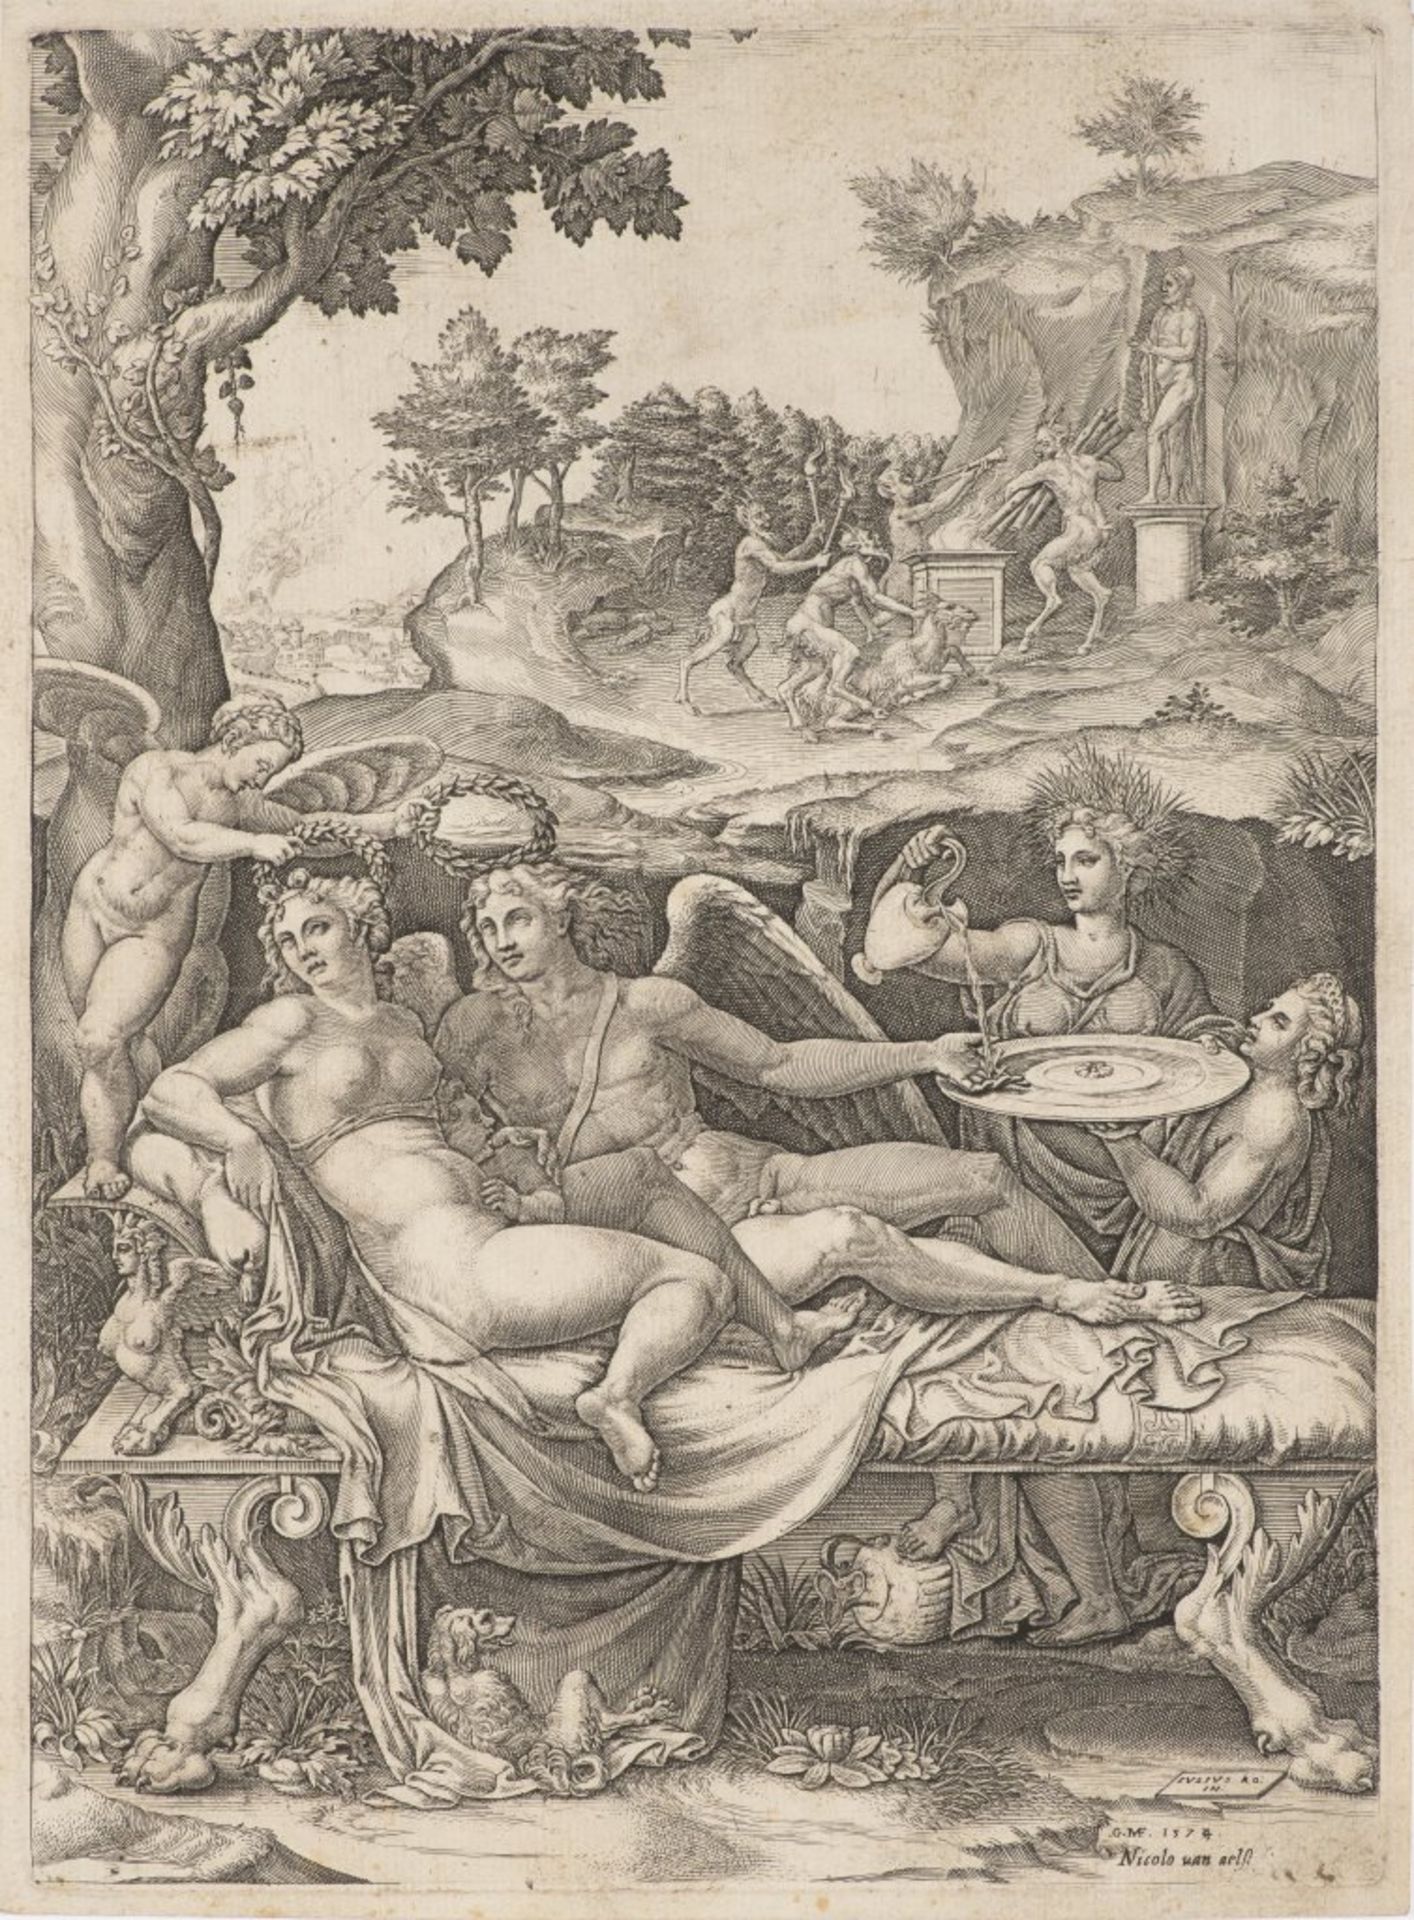 GIORGIO GHISI 1520 - 1582: PSYCHE AND EROS (CUPID) WITH DAUGHTER HEDONE 1574 Copper engraving 33 x